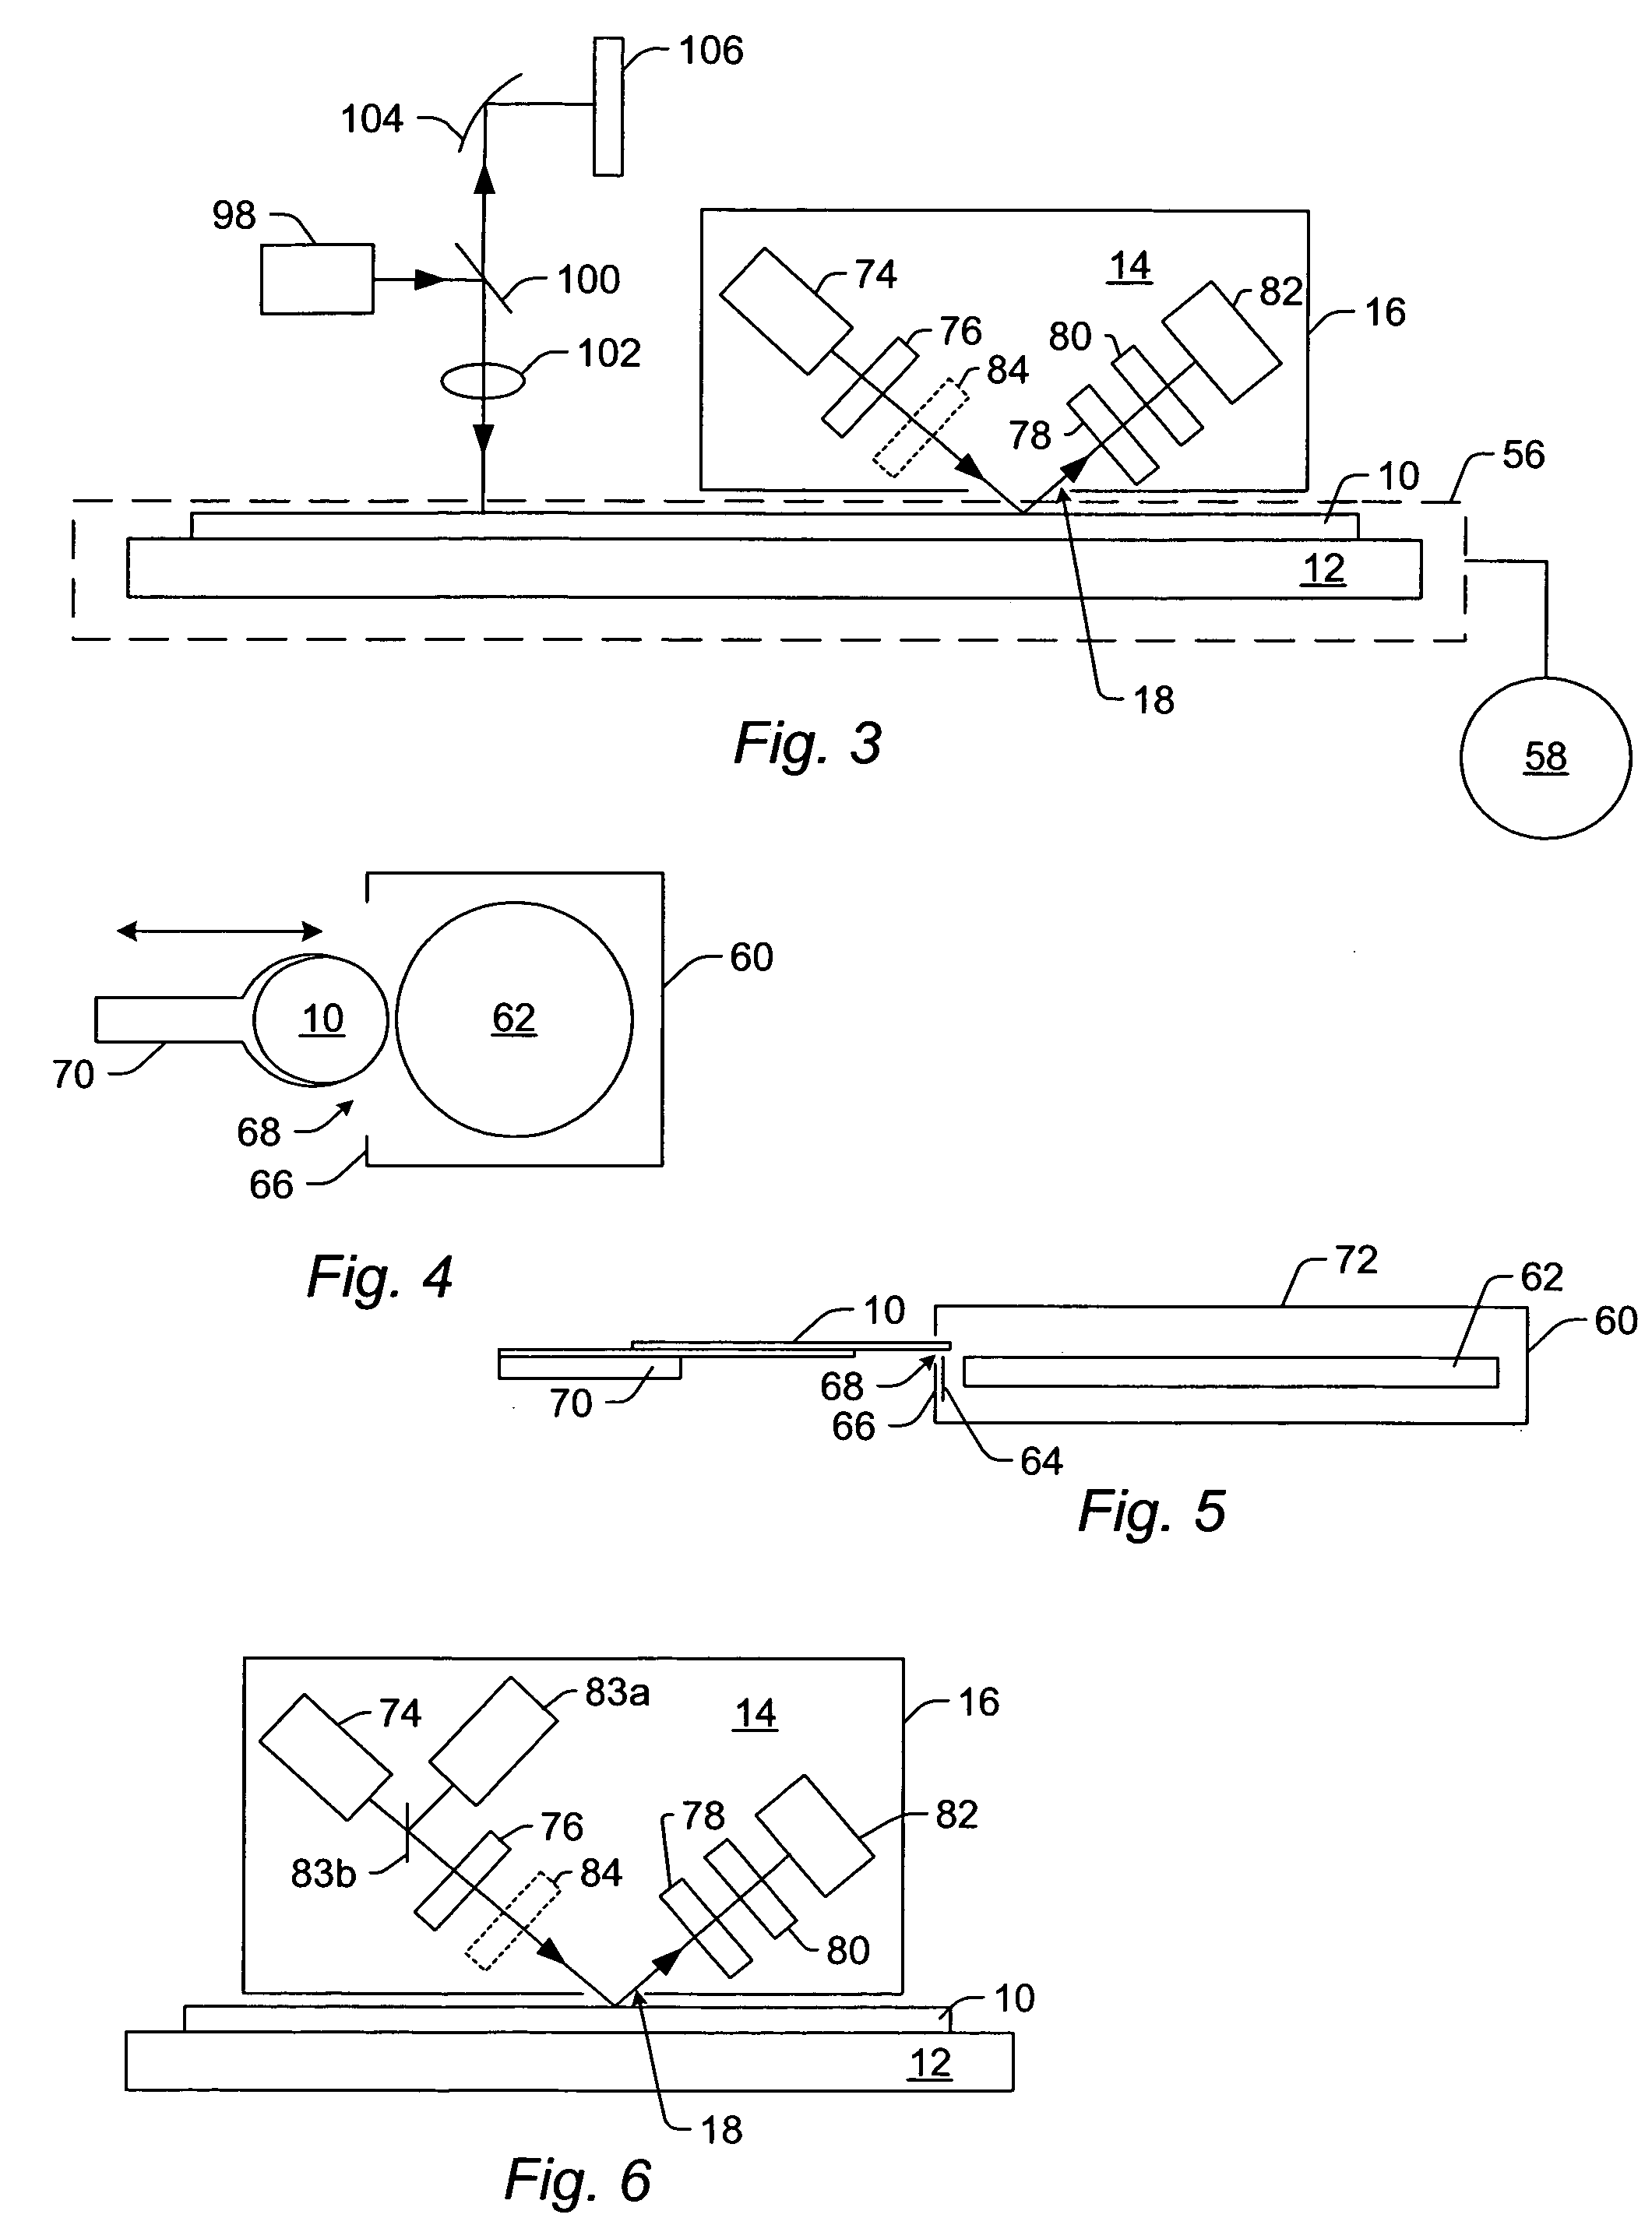 Systems and methods for measurement or analysis of a specimen using separated spectral peaks in light